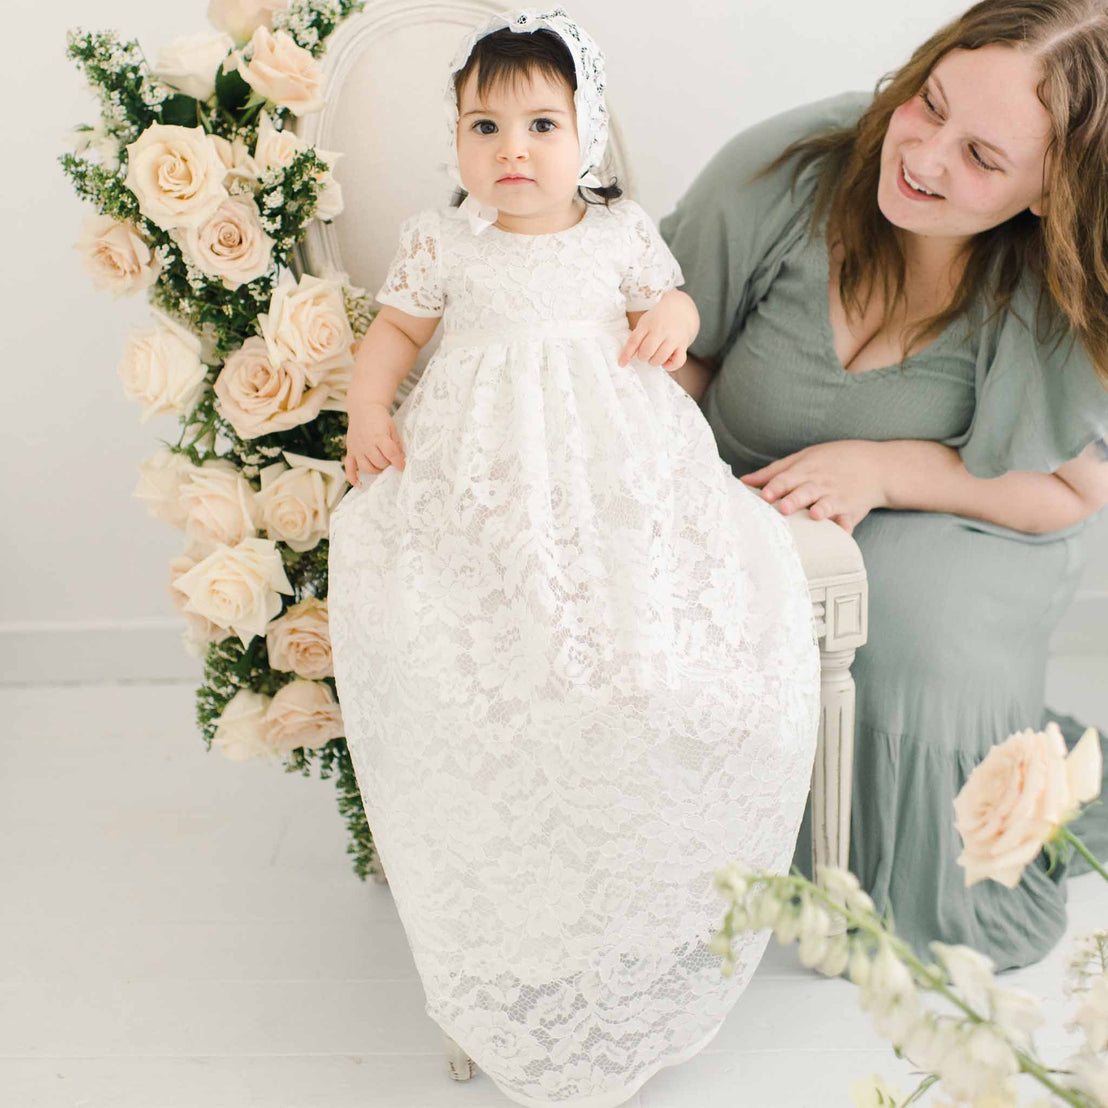 A woman in a gray dress smiles at a baby in a Rose Christening Gown & Bonnet, sitting on her lap. They are surrounded by cream roses in a light, airy room.